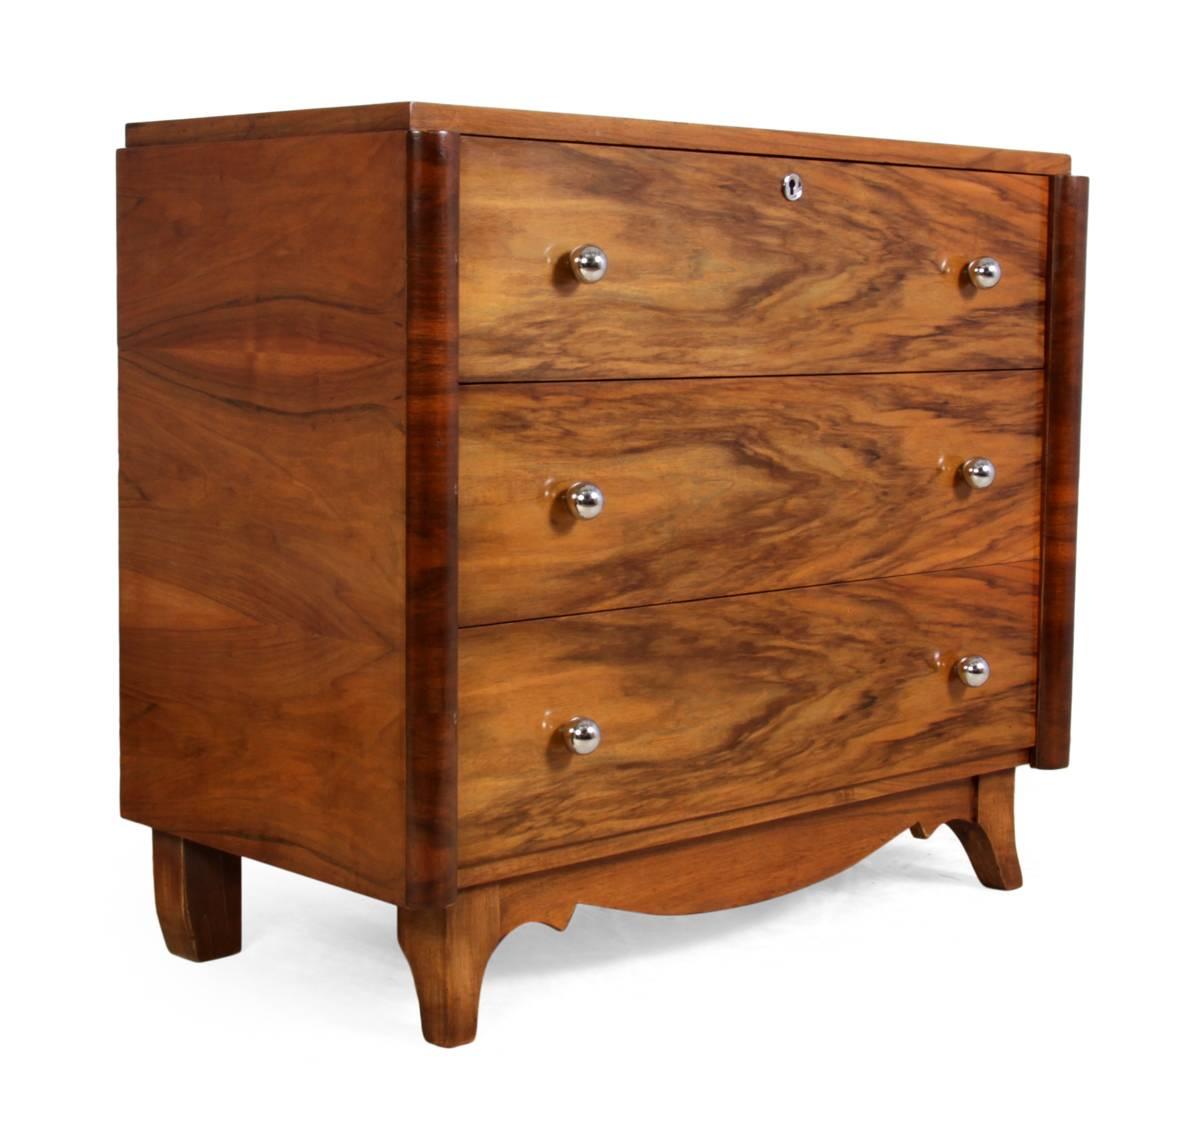 French Art Deco walnut chest, circa 1930
A good quality three drawer chest in walnut produced in France in the 1930s this chest has been fully restored the drawers all run smoothly and hand polished
Age: circa 1930
Style: Art Deco
Material: